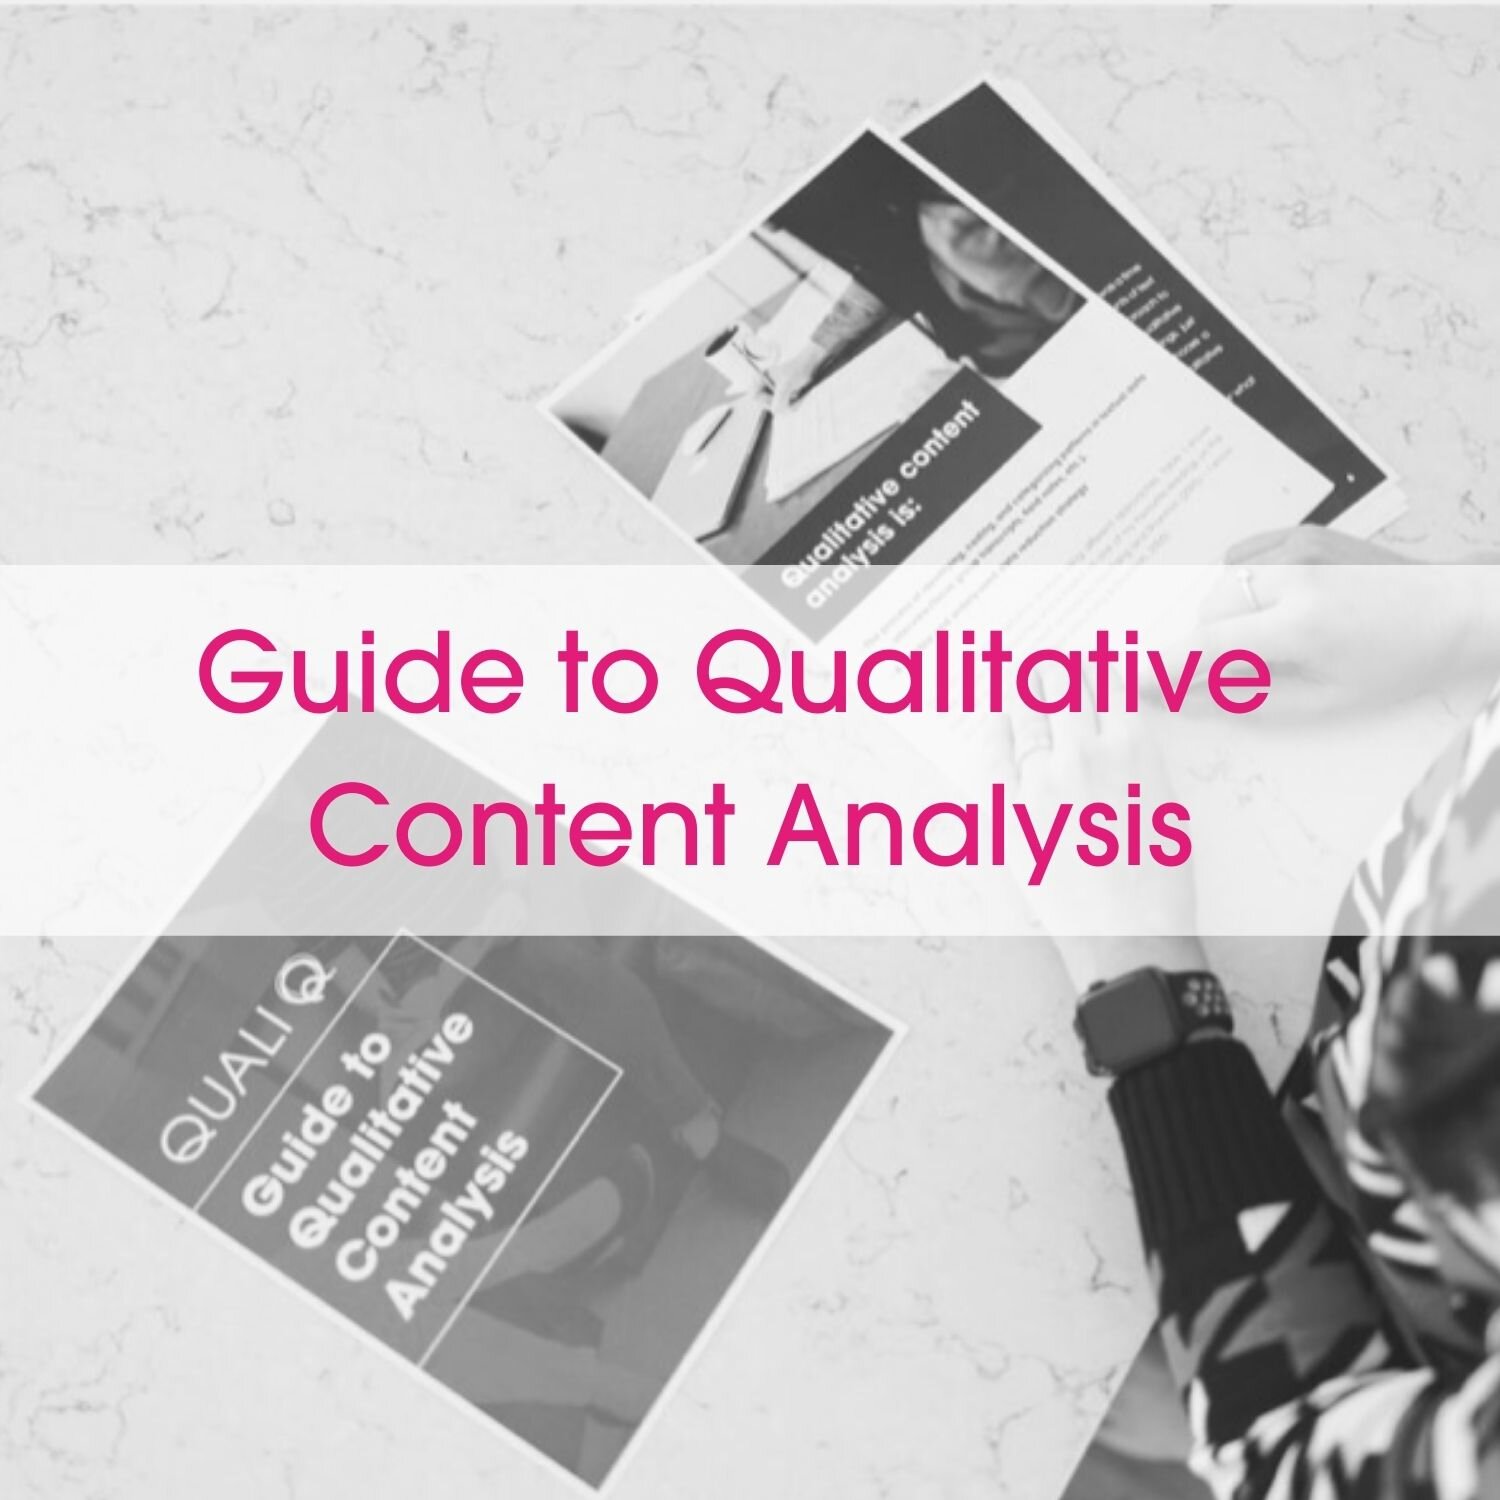  Did you know that qualitative content analysis is one the most common approaches to data analysis in Qualitative Description? 